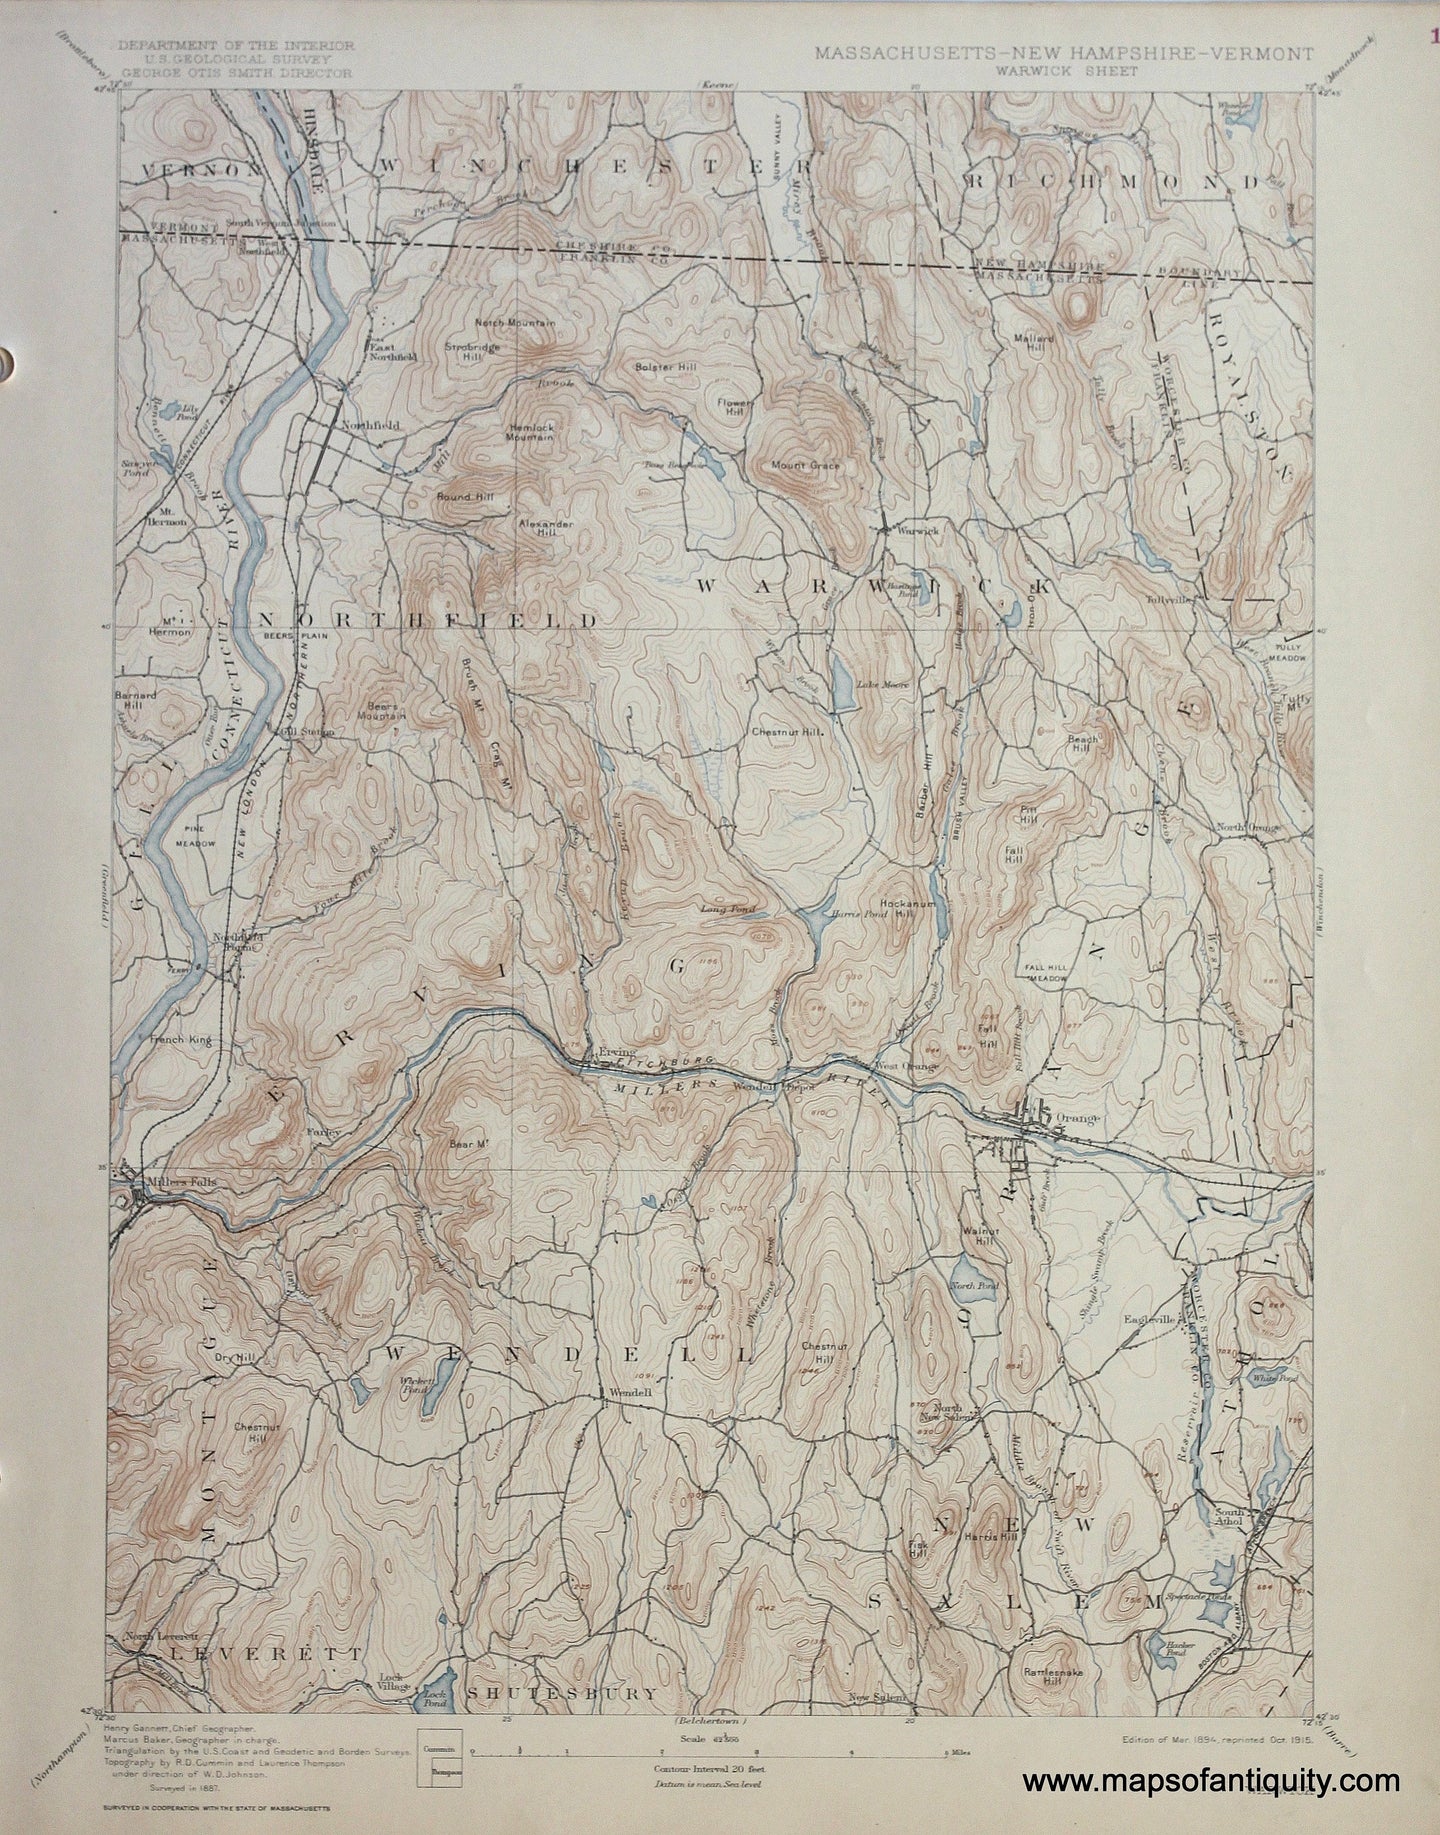 Genuine-Antique-Map-Warwick-Massachusetts-New-Hampshire-Vermont--1915-US-Geological-Survey--Maps-Of-Antiquity